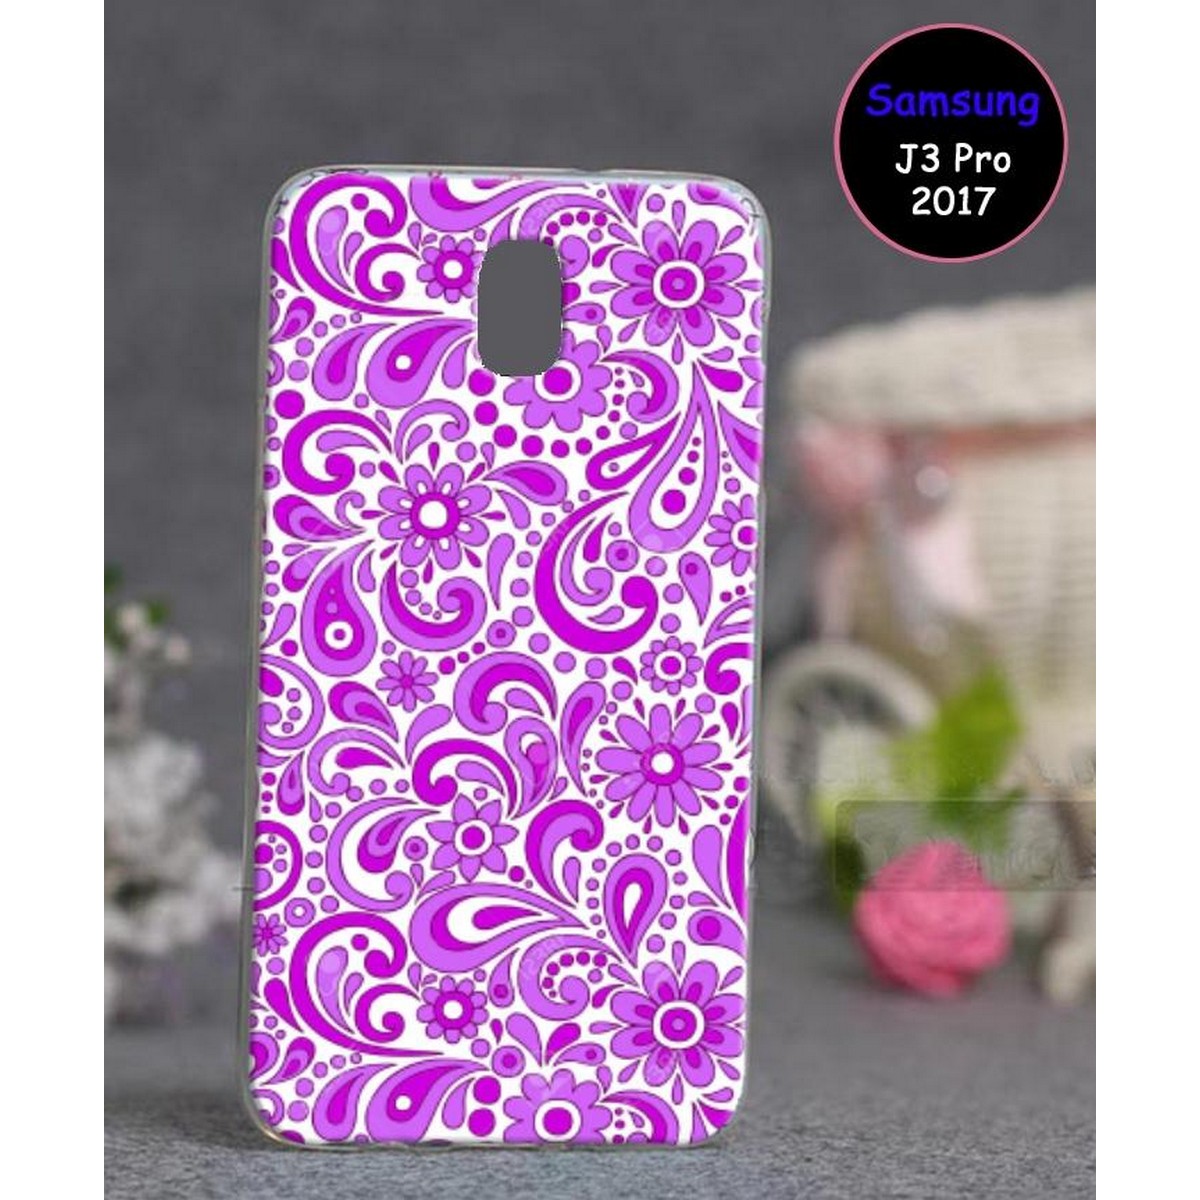 Samsung J3 Pro 17 Mobile Cover Floral Style Purple Buy Online At Best Prices In Pakistan Daraz Pk